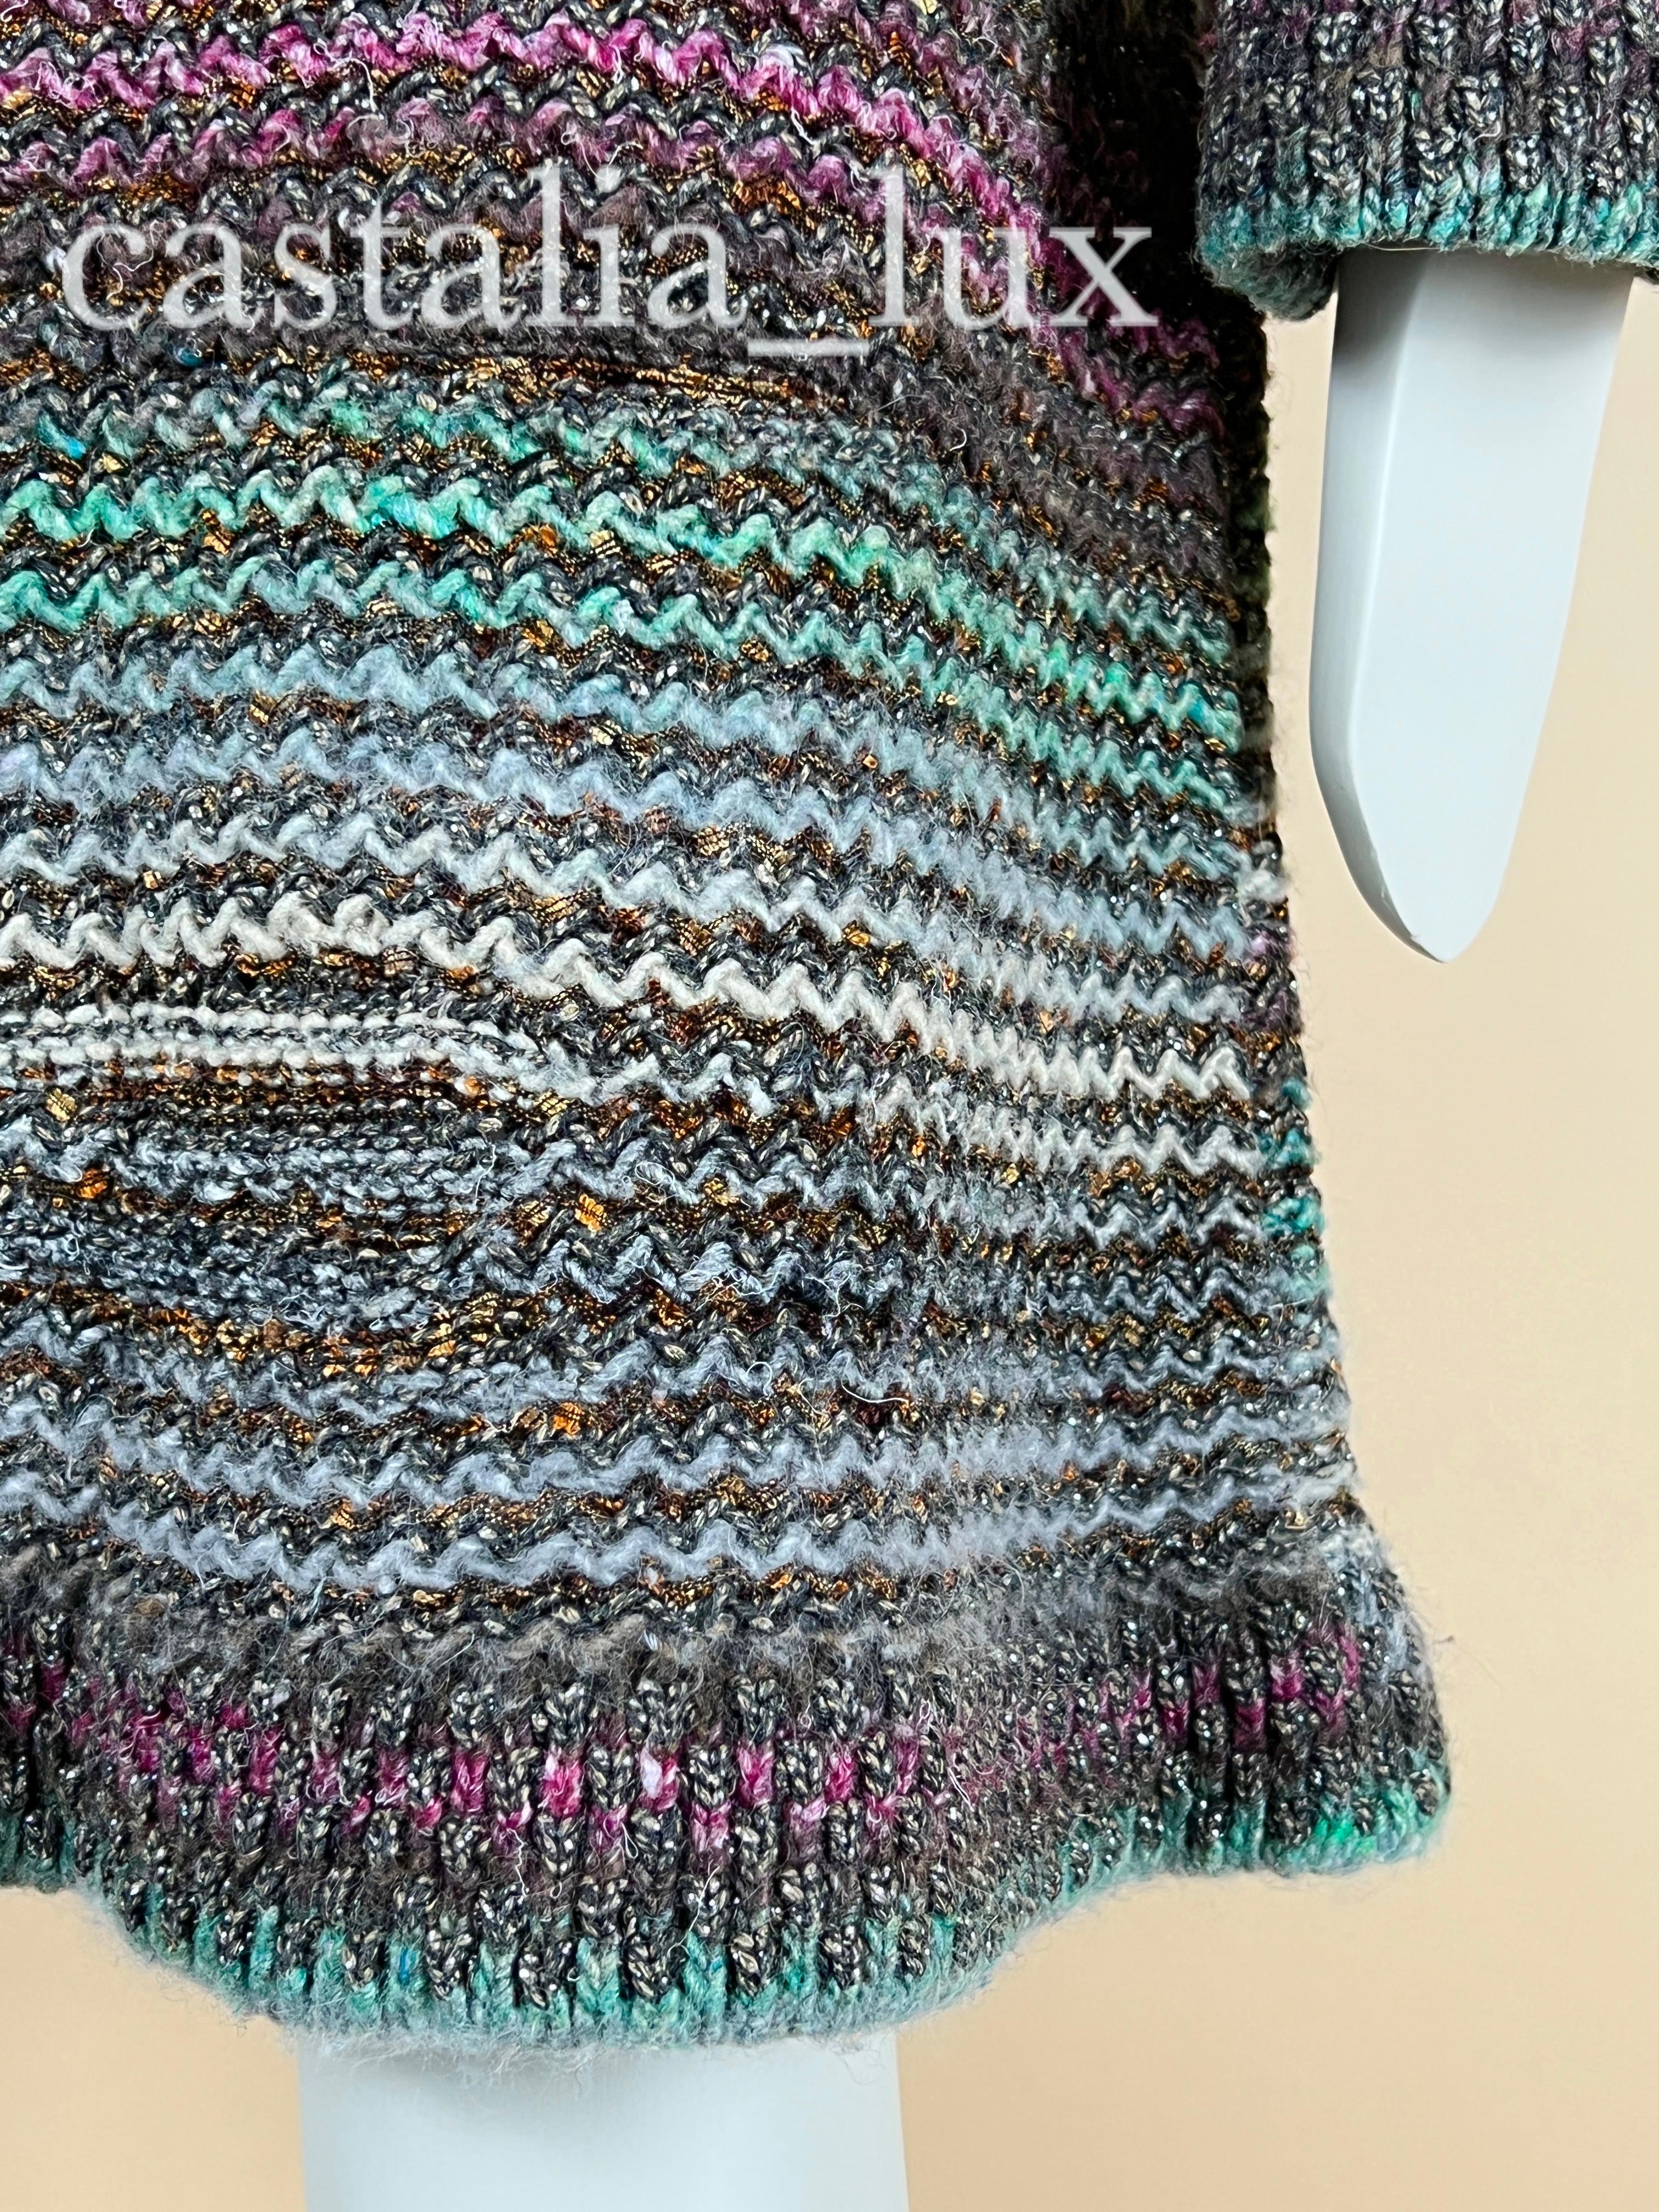 Chanel Runway Paris /BYZANCE Dress For Sale 4